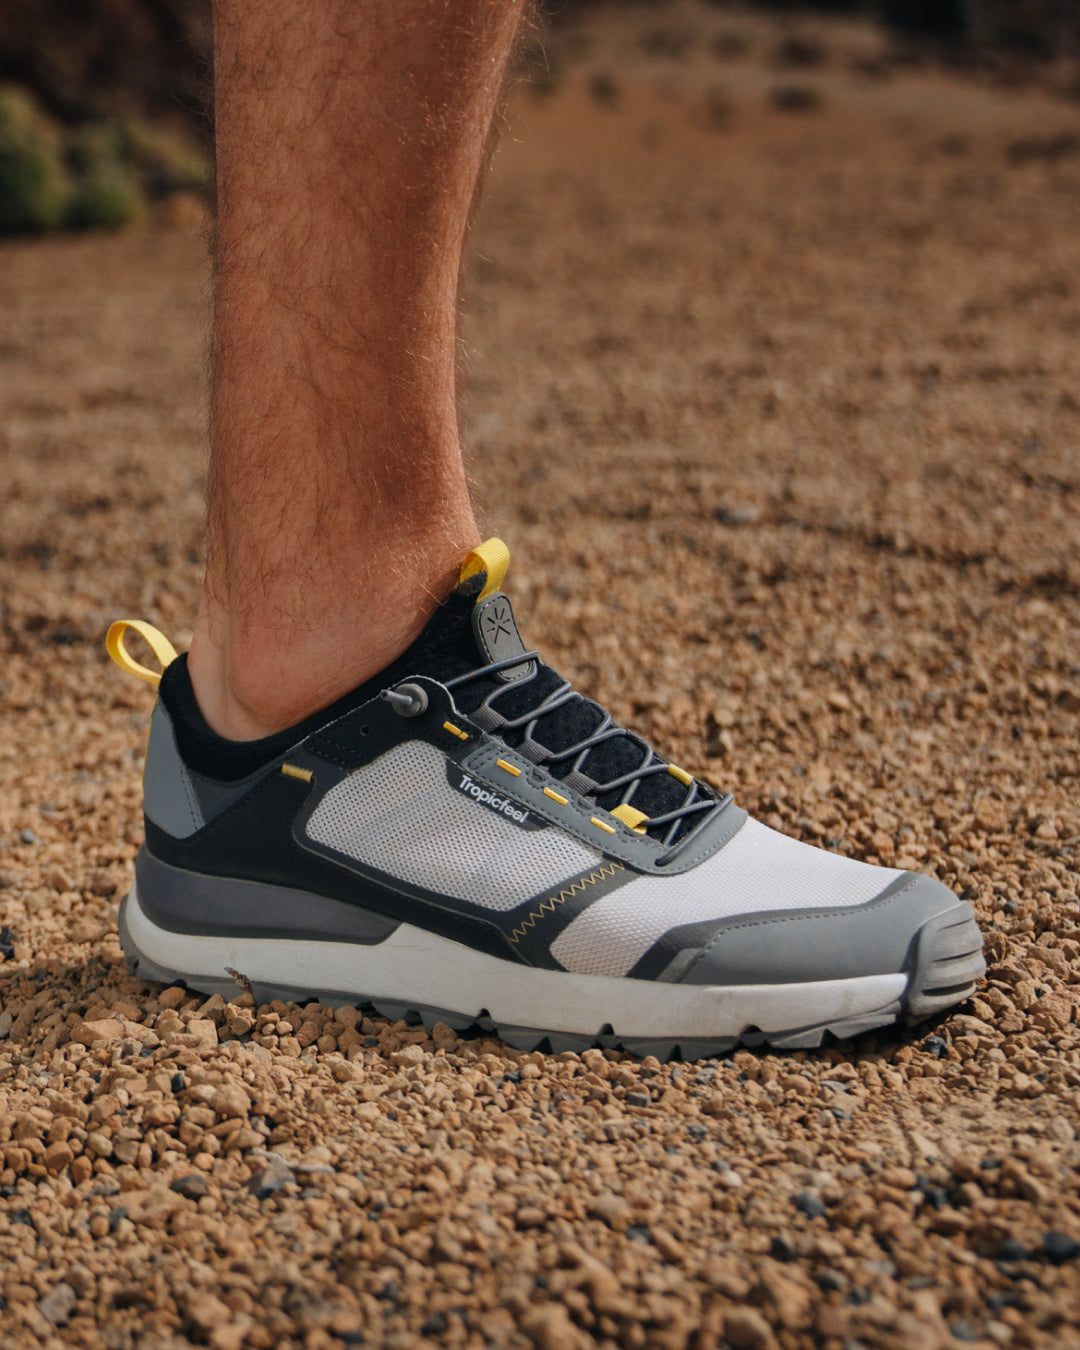 All-Terrain X - Sneaker for Extreme Adventures